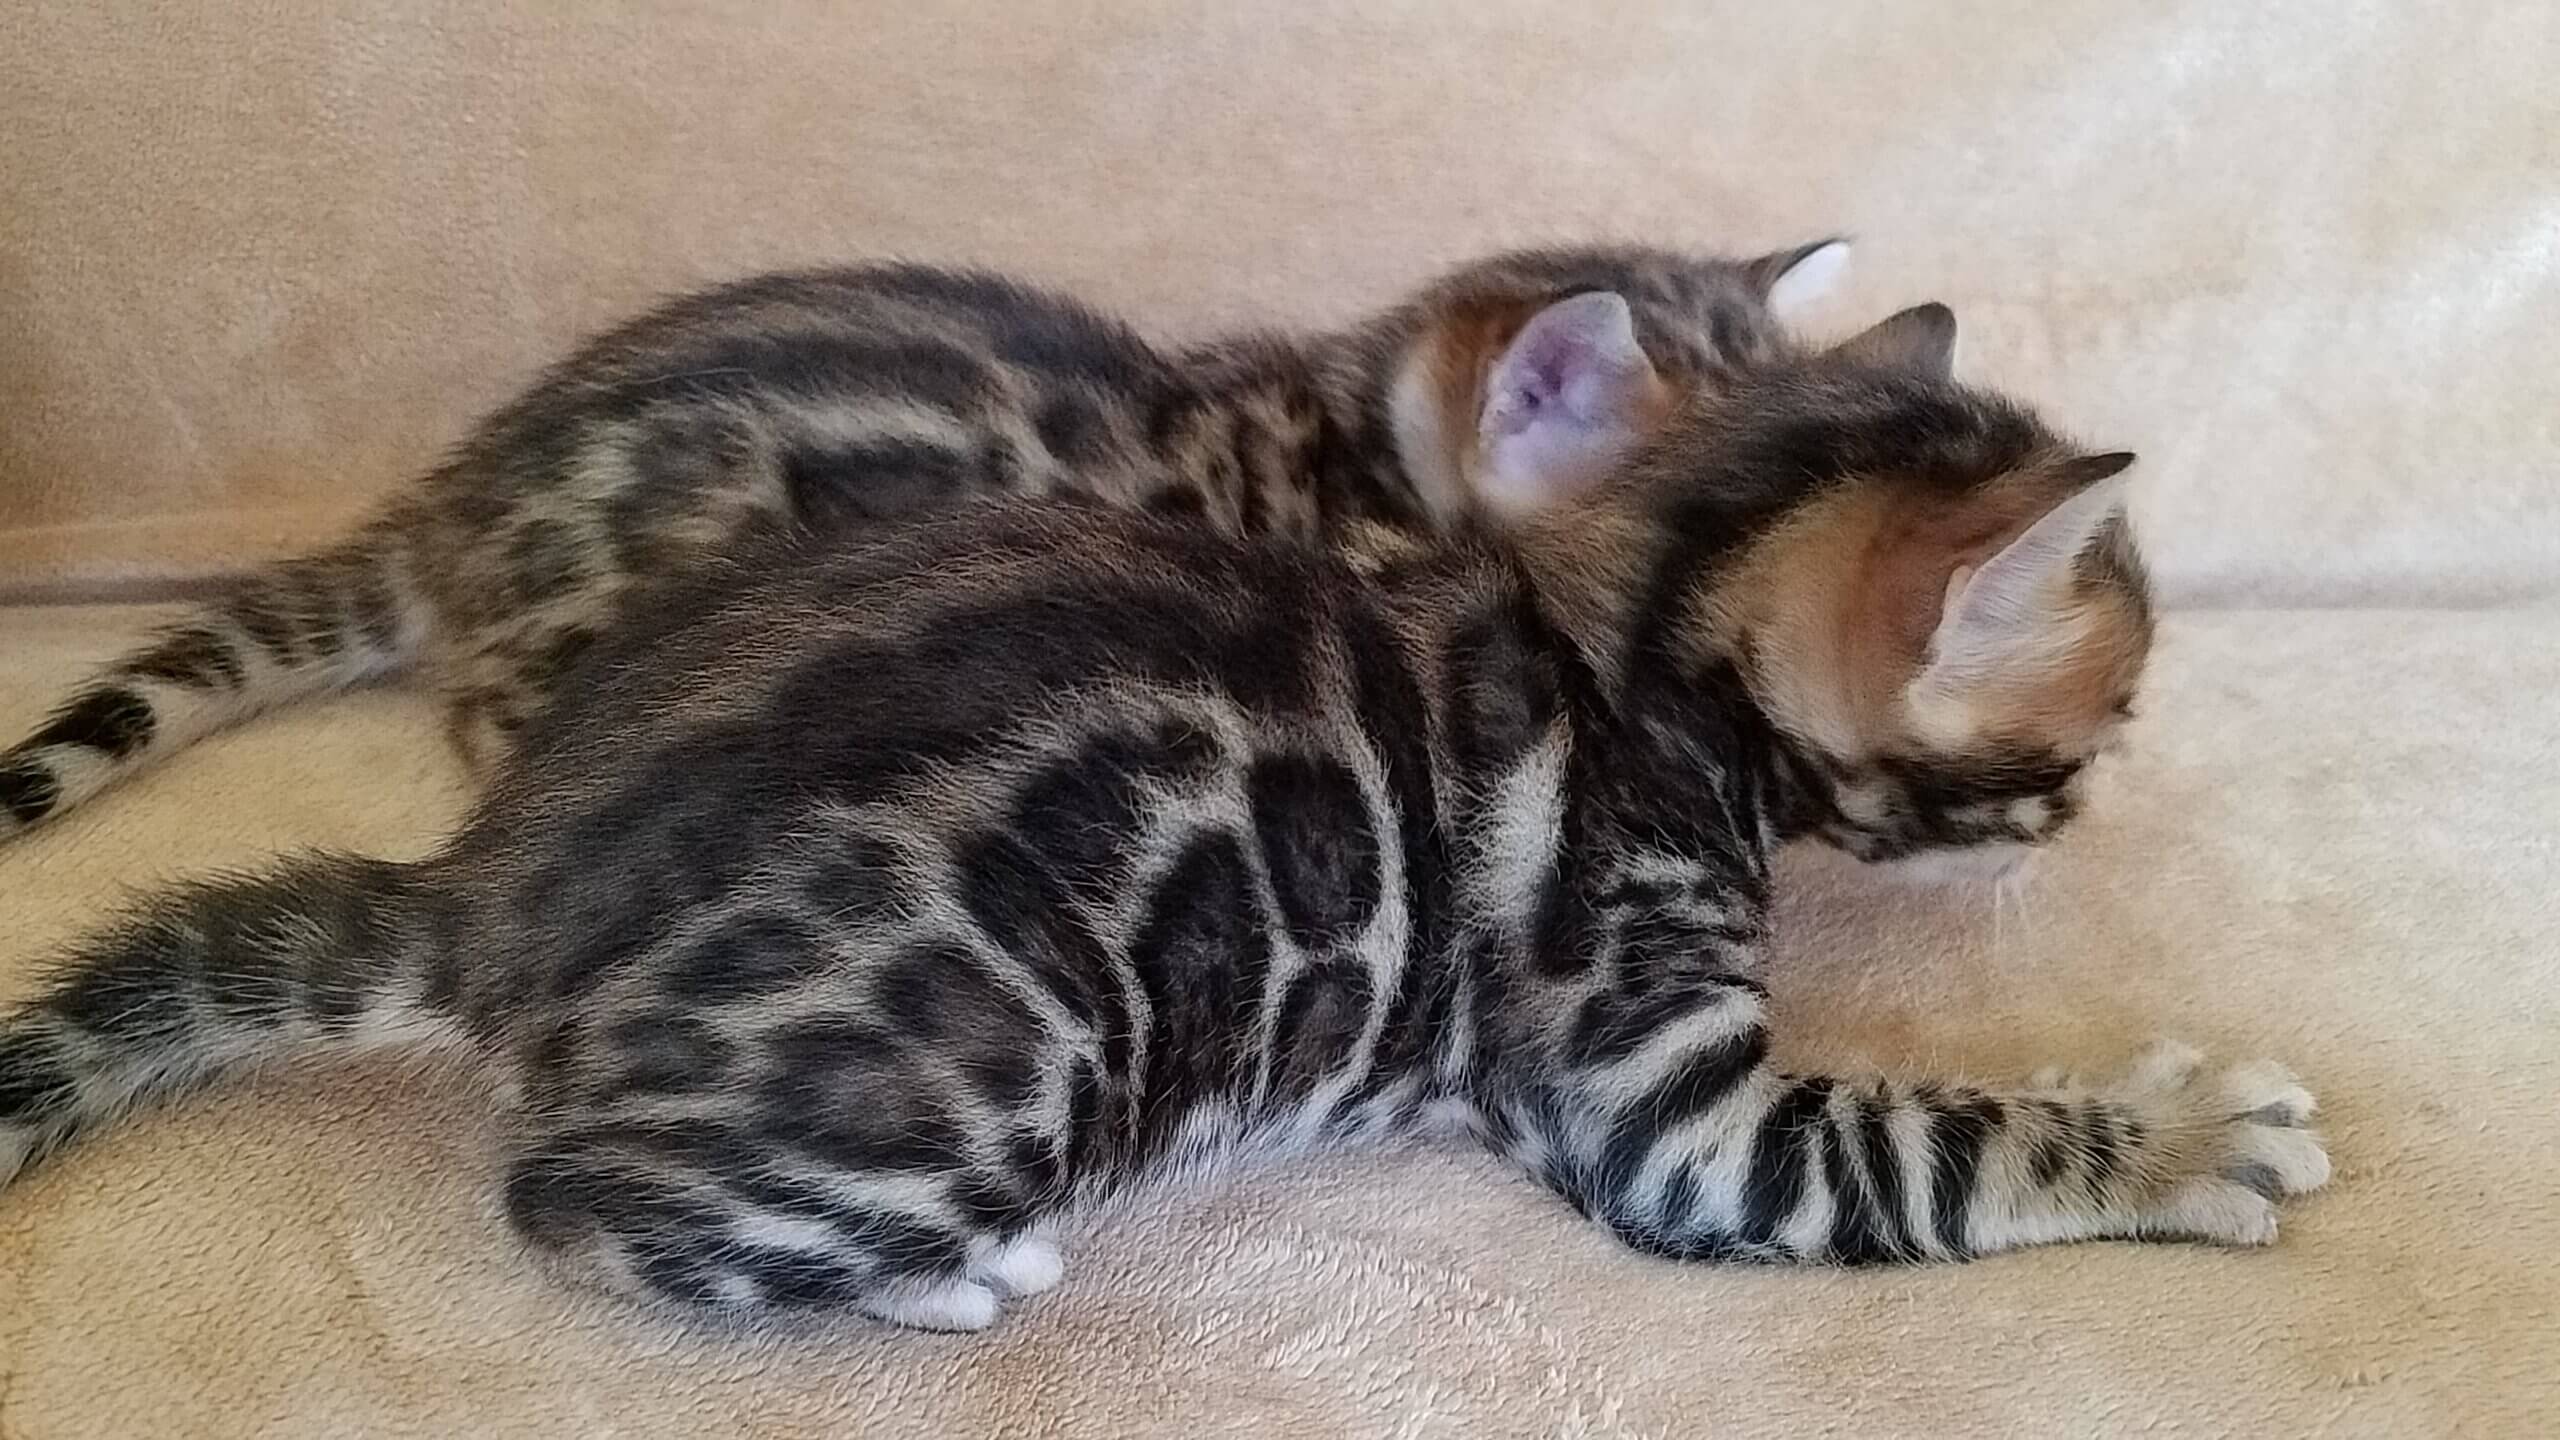 Bengal kittens for sale, Bengal cats for sale, Bengal kittens adoption